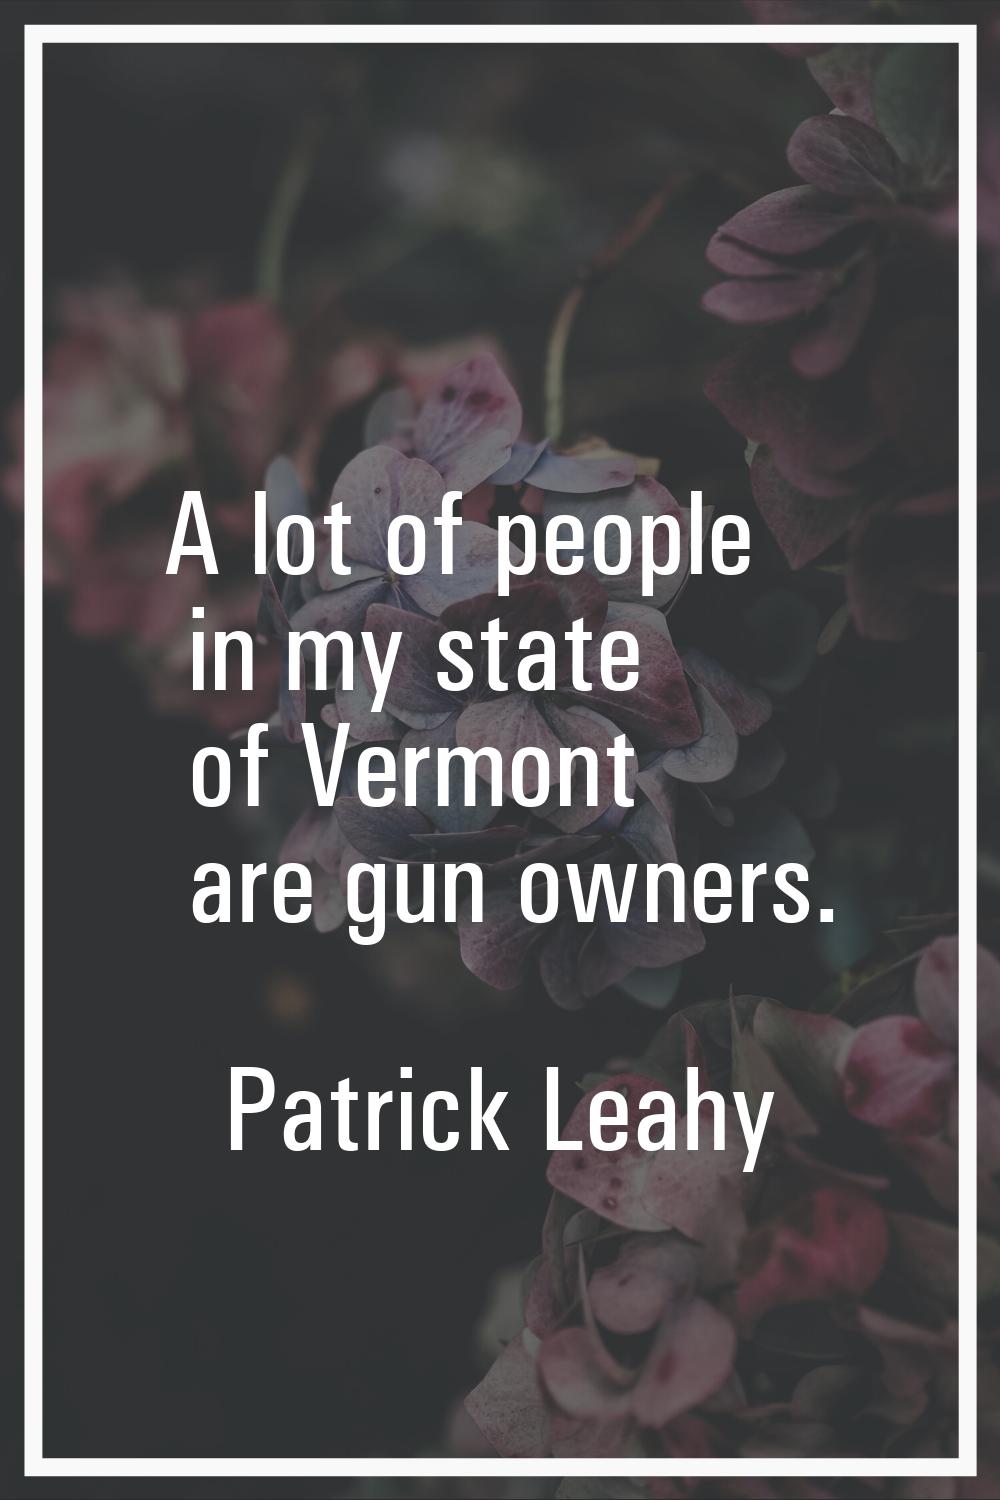 A lot of people in my state of Vermont are gun owners.